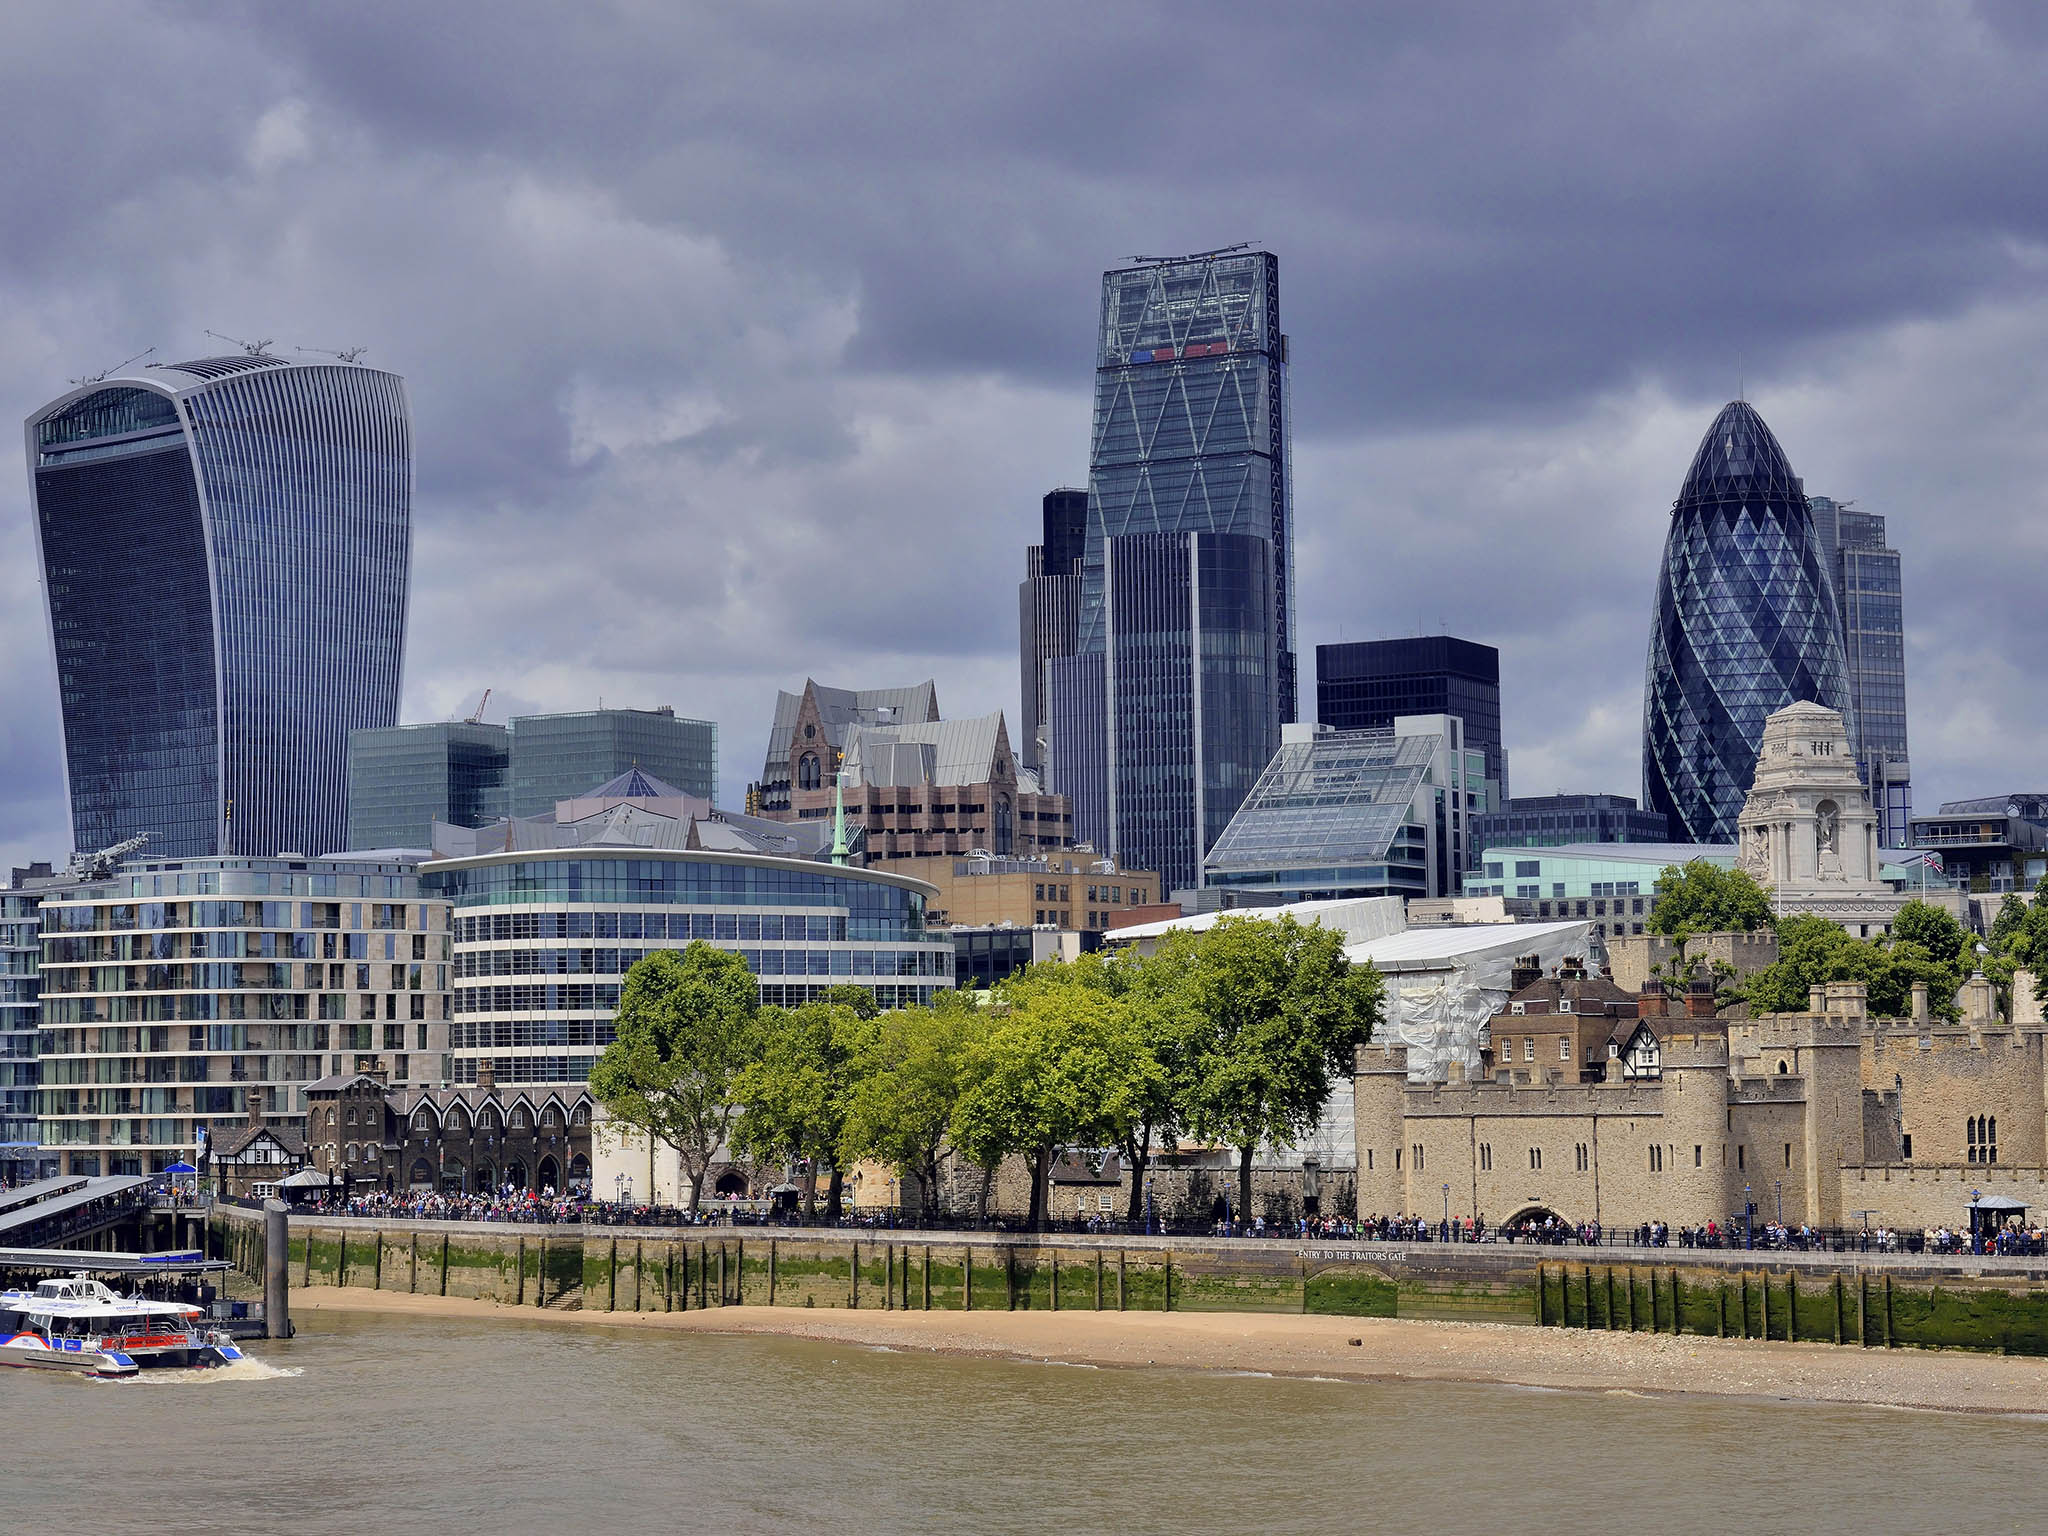 The UK's 200 foreign law firm rely on London's position as global financial centre, a report says